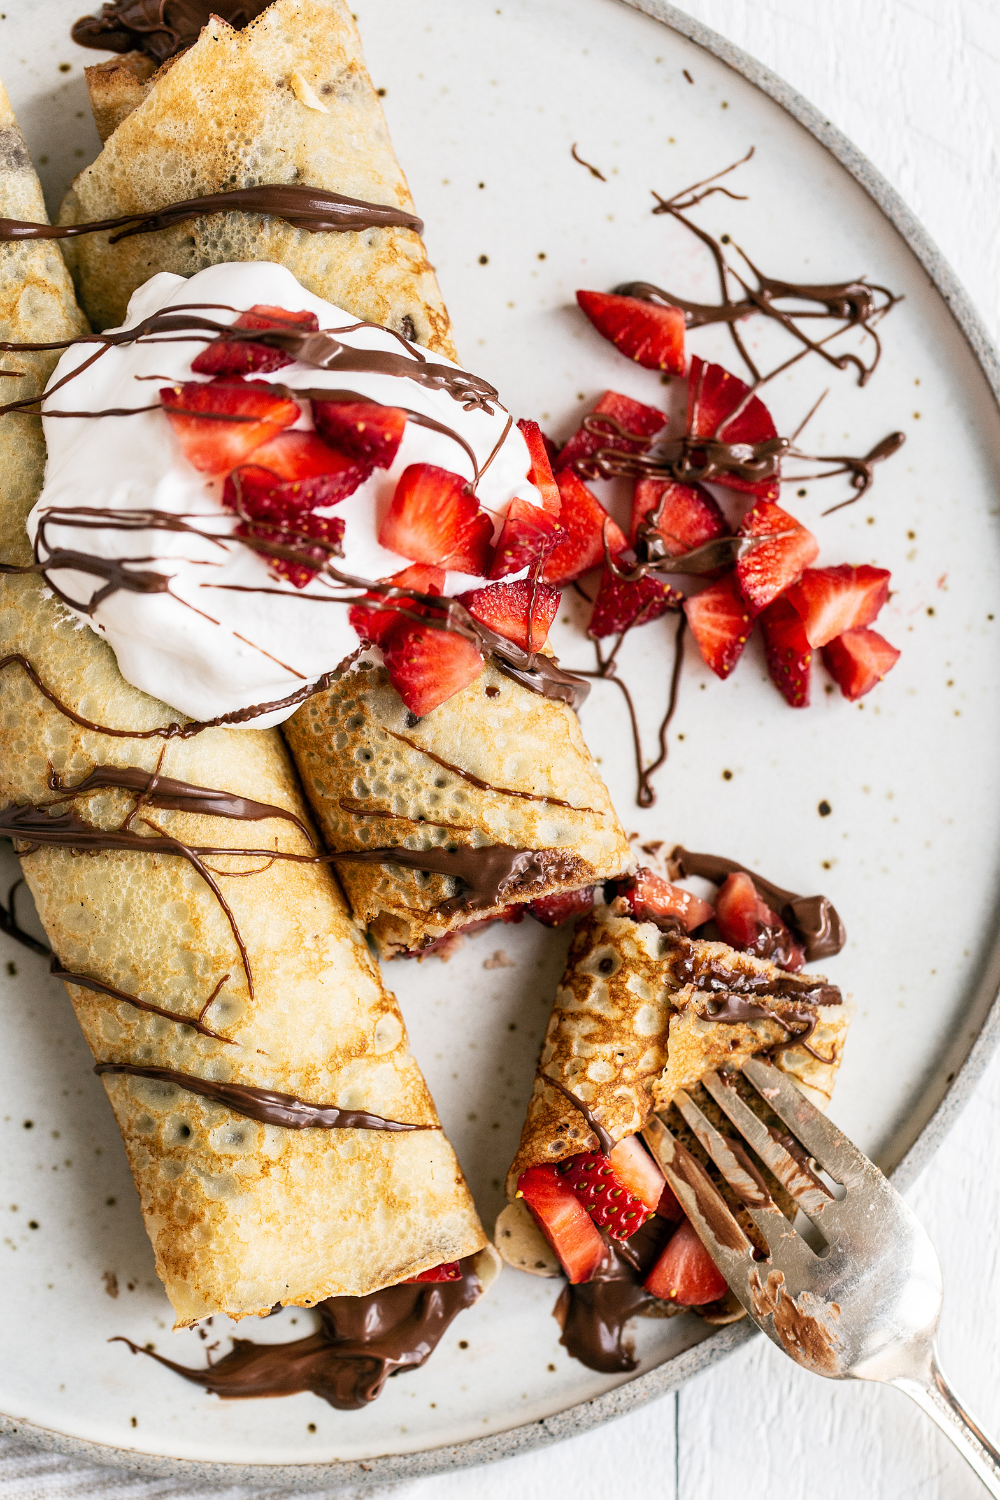 two crepes on a plate, ready to serve.